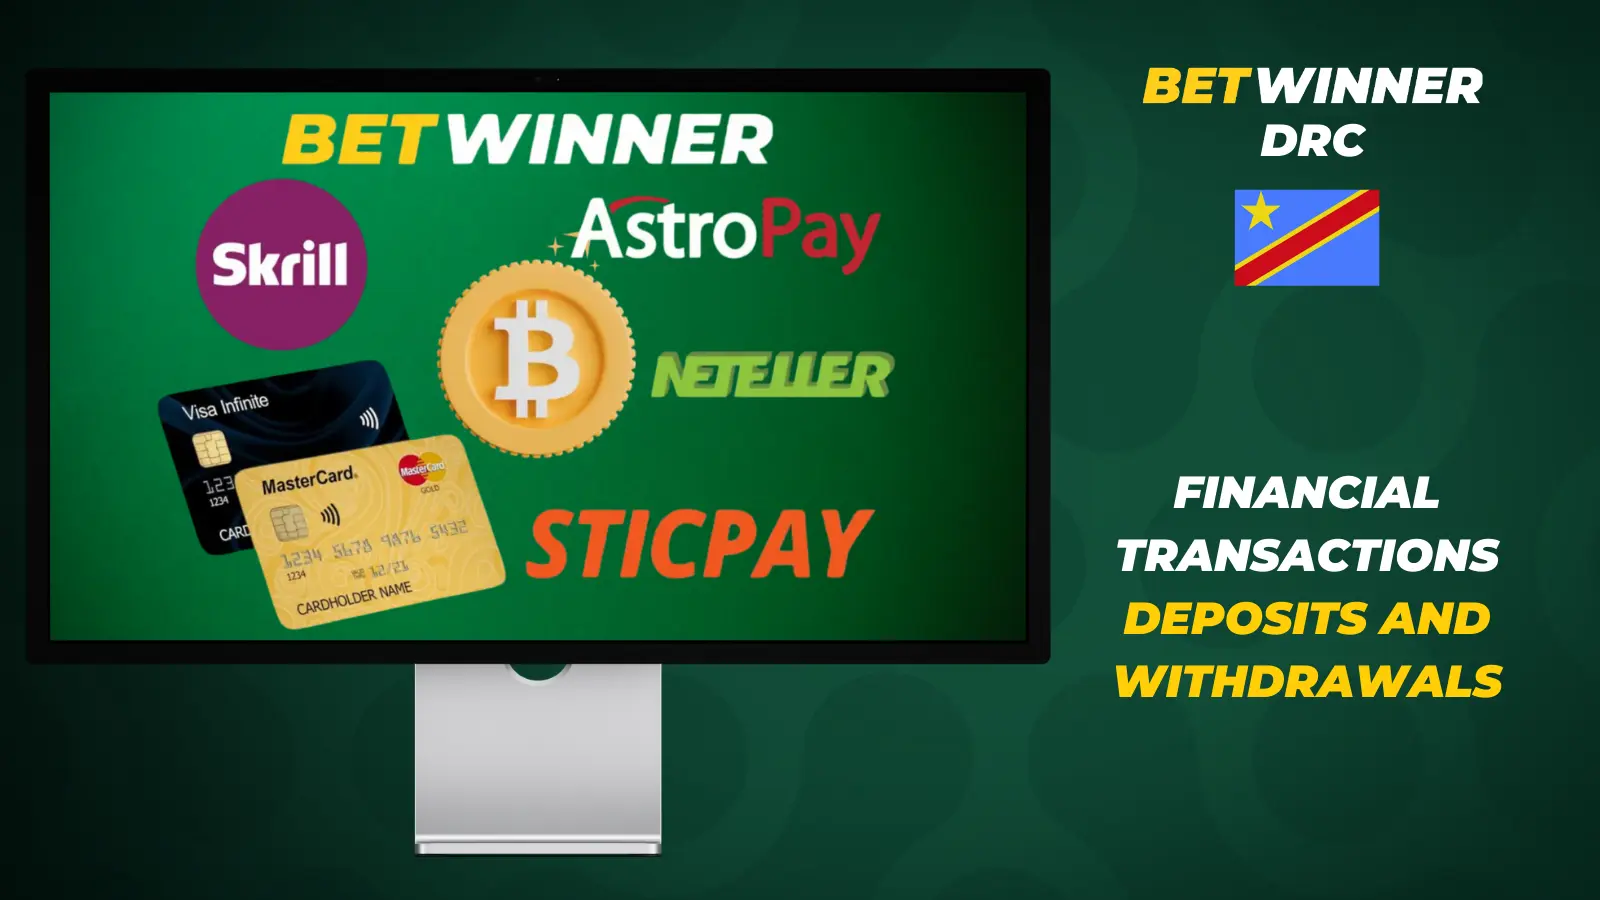 The Best 10 Examples Of Online Betting with Betwinner